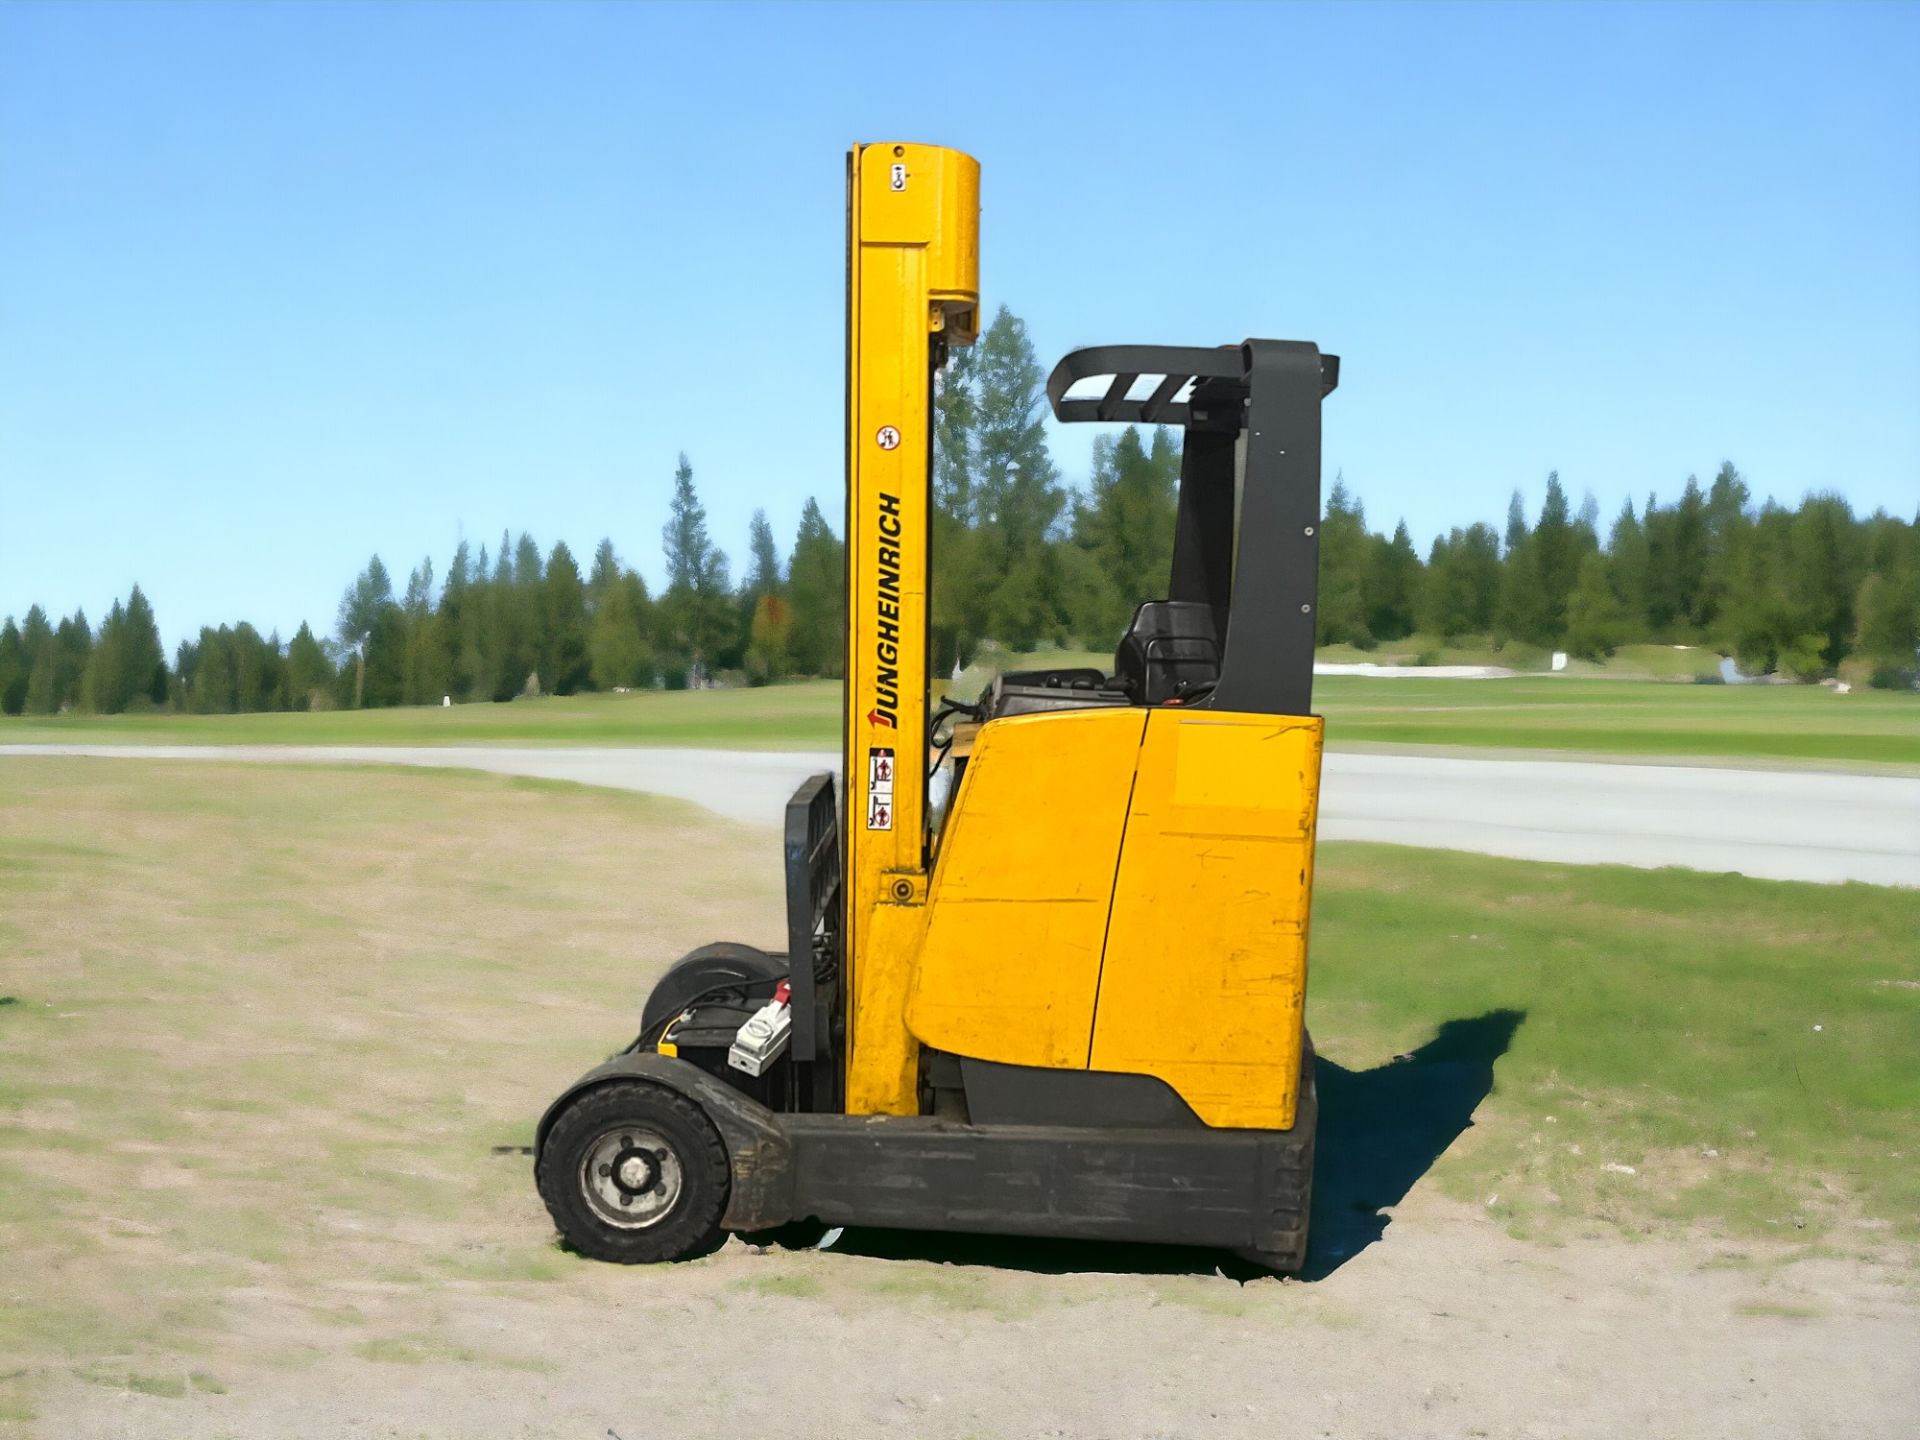 JUNGHEINRICH REACH TRUCK ETVC 16: POWERFUL ELECTRIC WORKHORSE WITH LOW HOURS **(INCLUDES CHARGER)** - Image 5 of 6